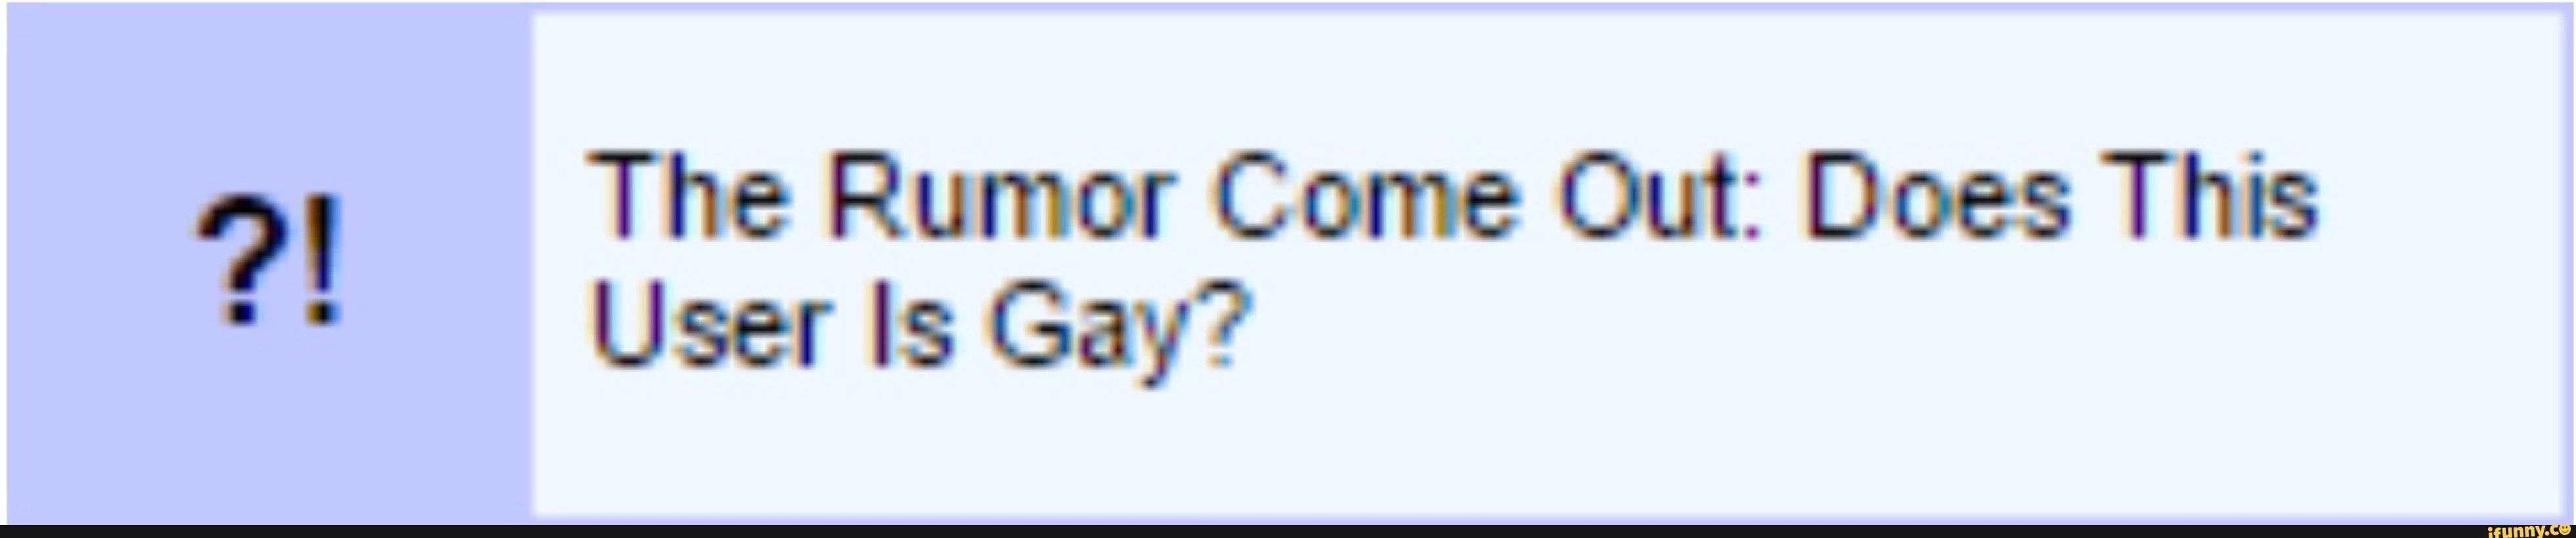 Userbox: The Rumor Come Out: Does This User Is Gay?